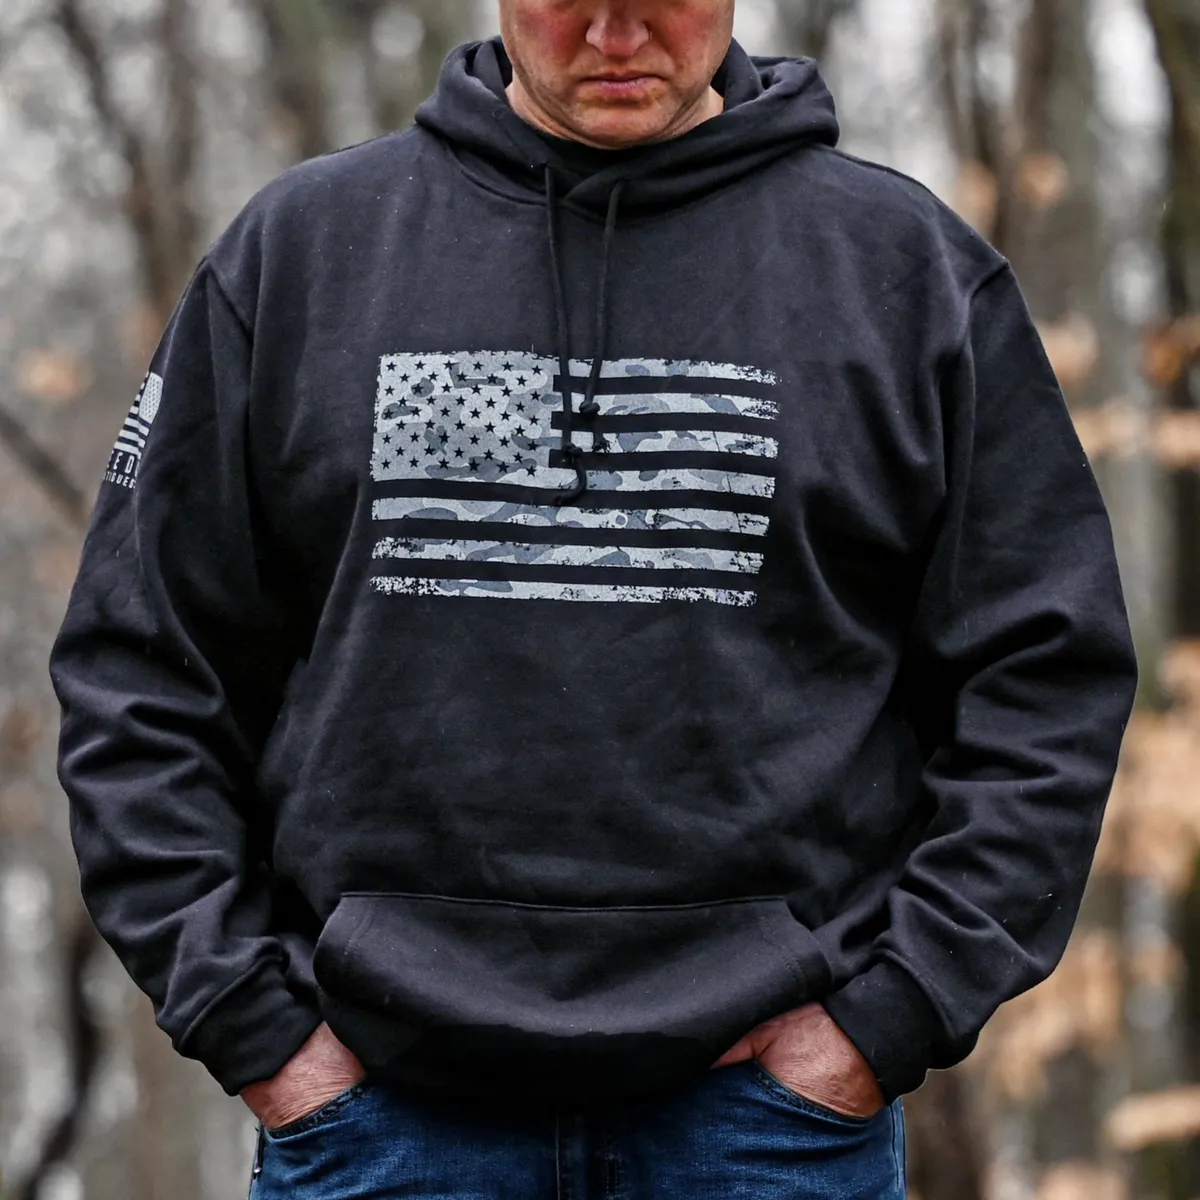 Secondary shot of Co-founder Chris wearing the Black Oversized Urban Camo Hoodie